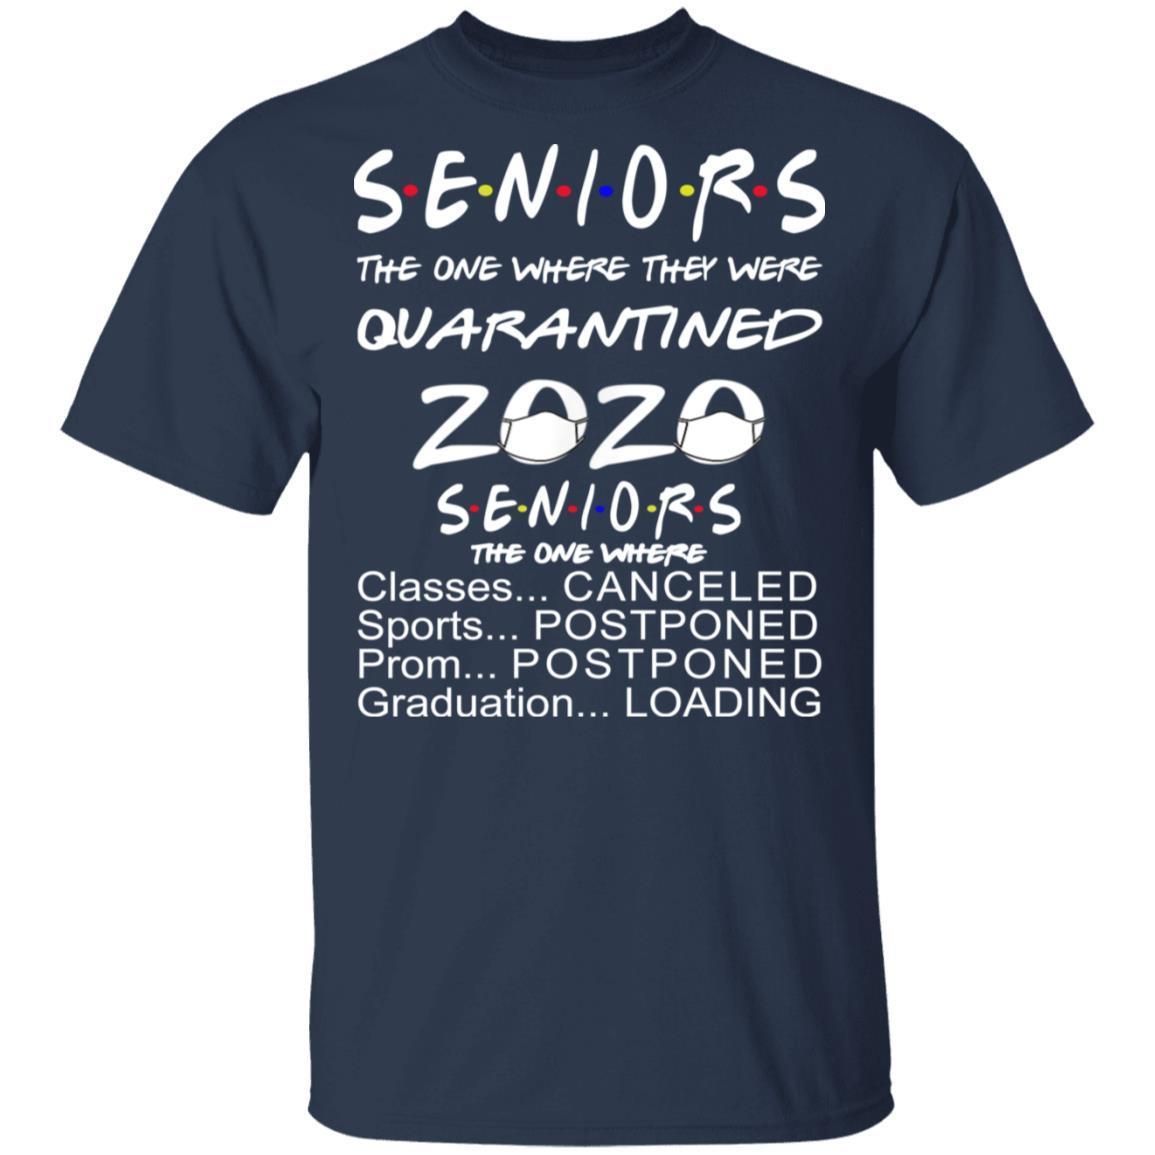 Seniors The ones where they are quarantined 2020 shirt classes canceled, sports postponed, prom postponed, graduation loading